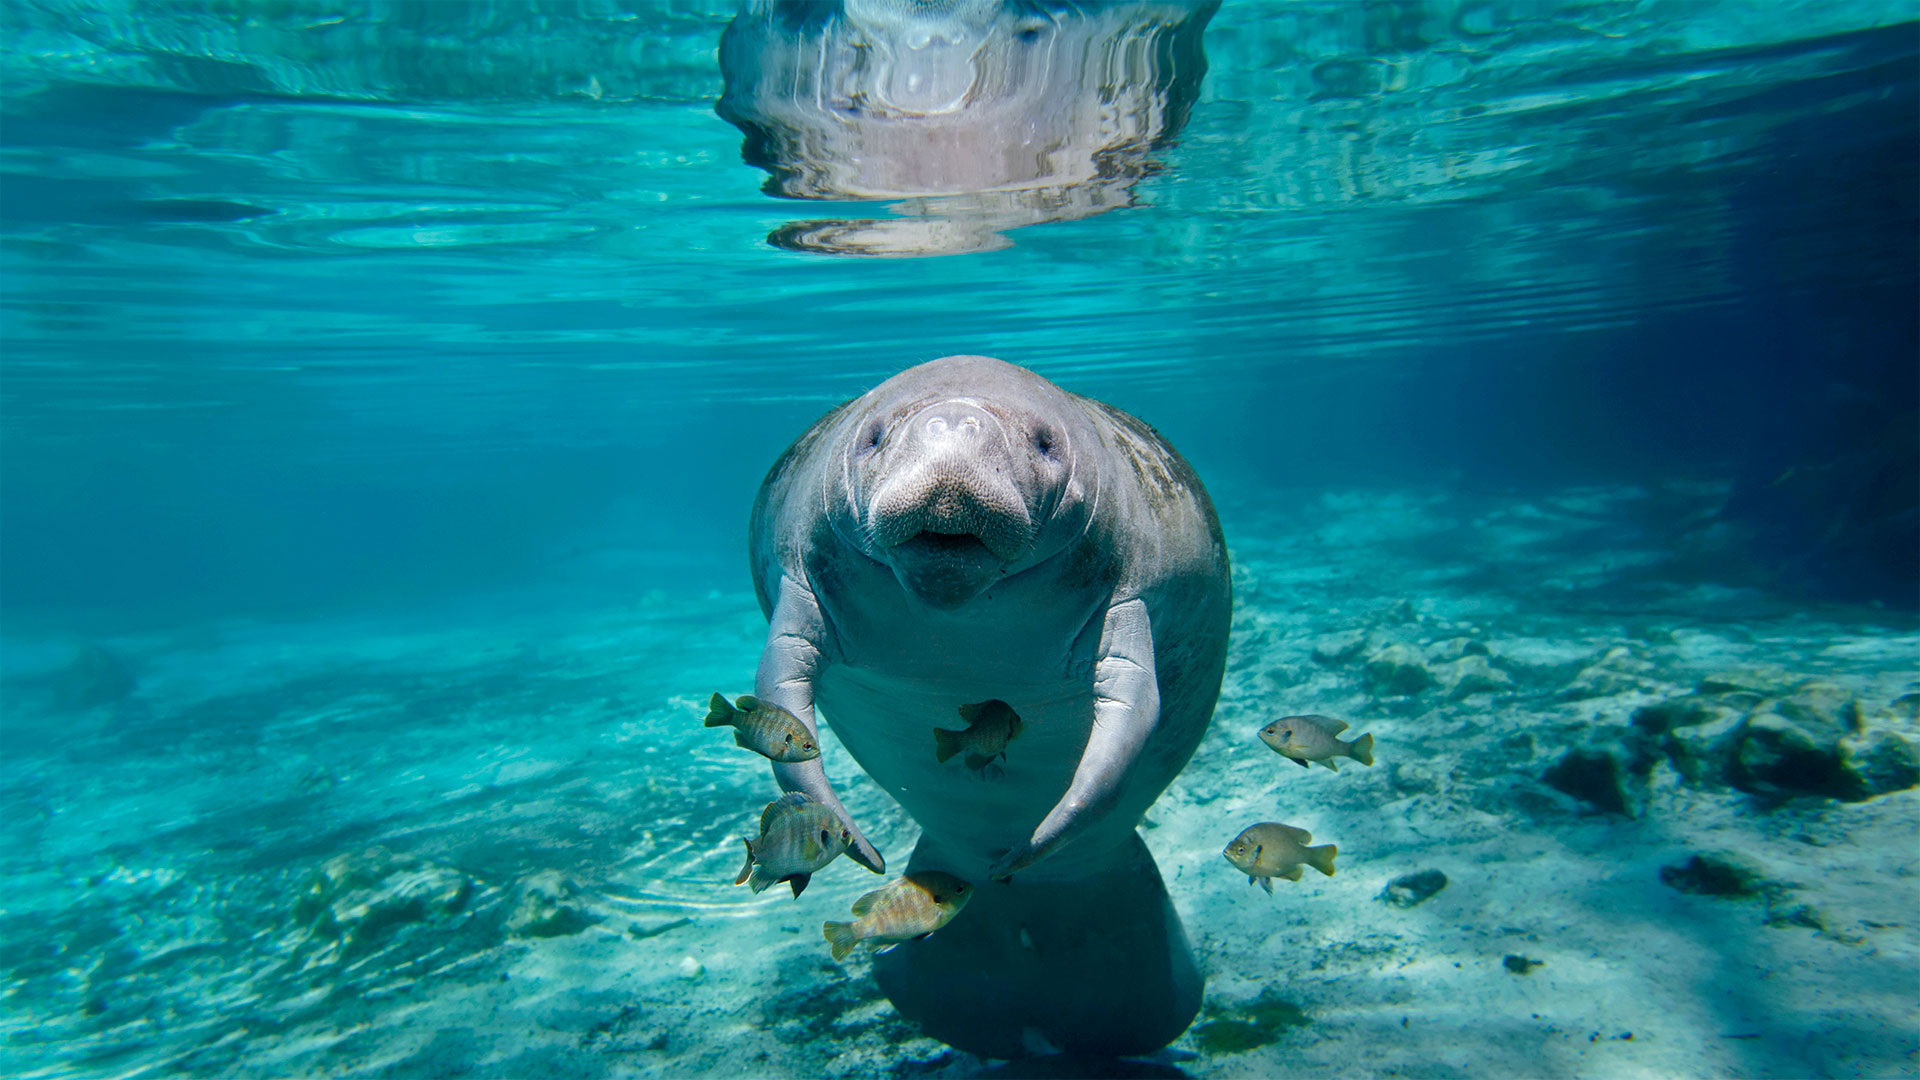 Manatee in Florida - Paul E Tessier/Cavan Images/Offset by Shutterstock)